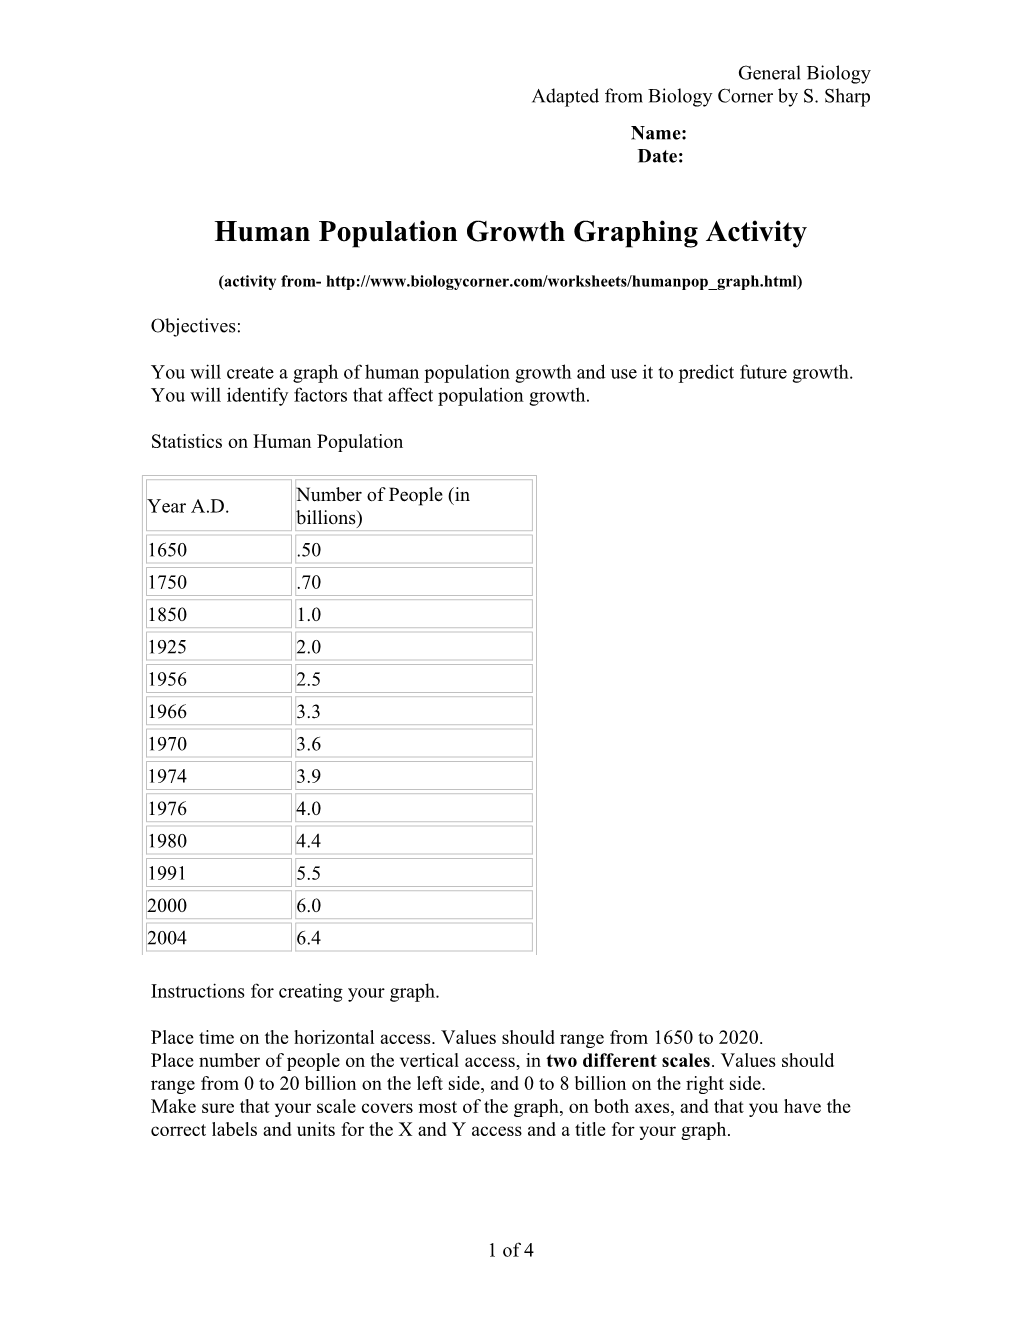 Human Population Growth Graphing Activity